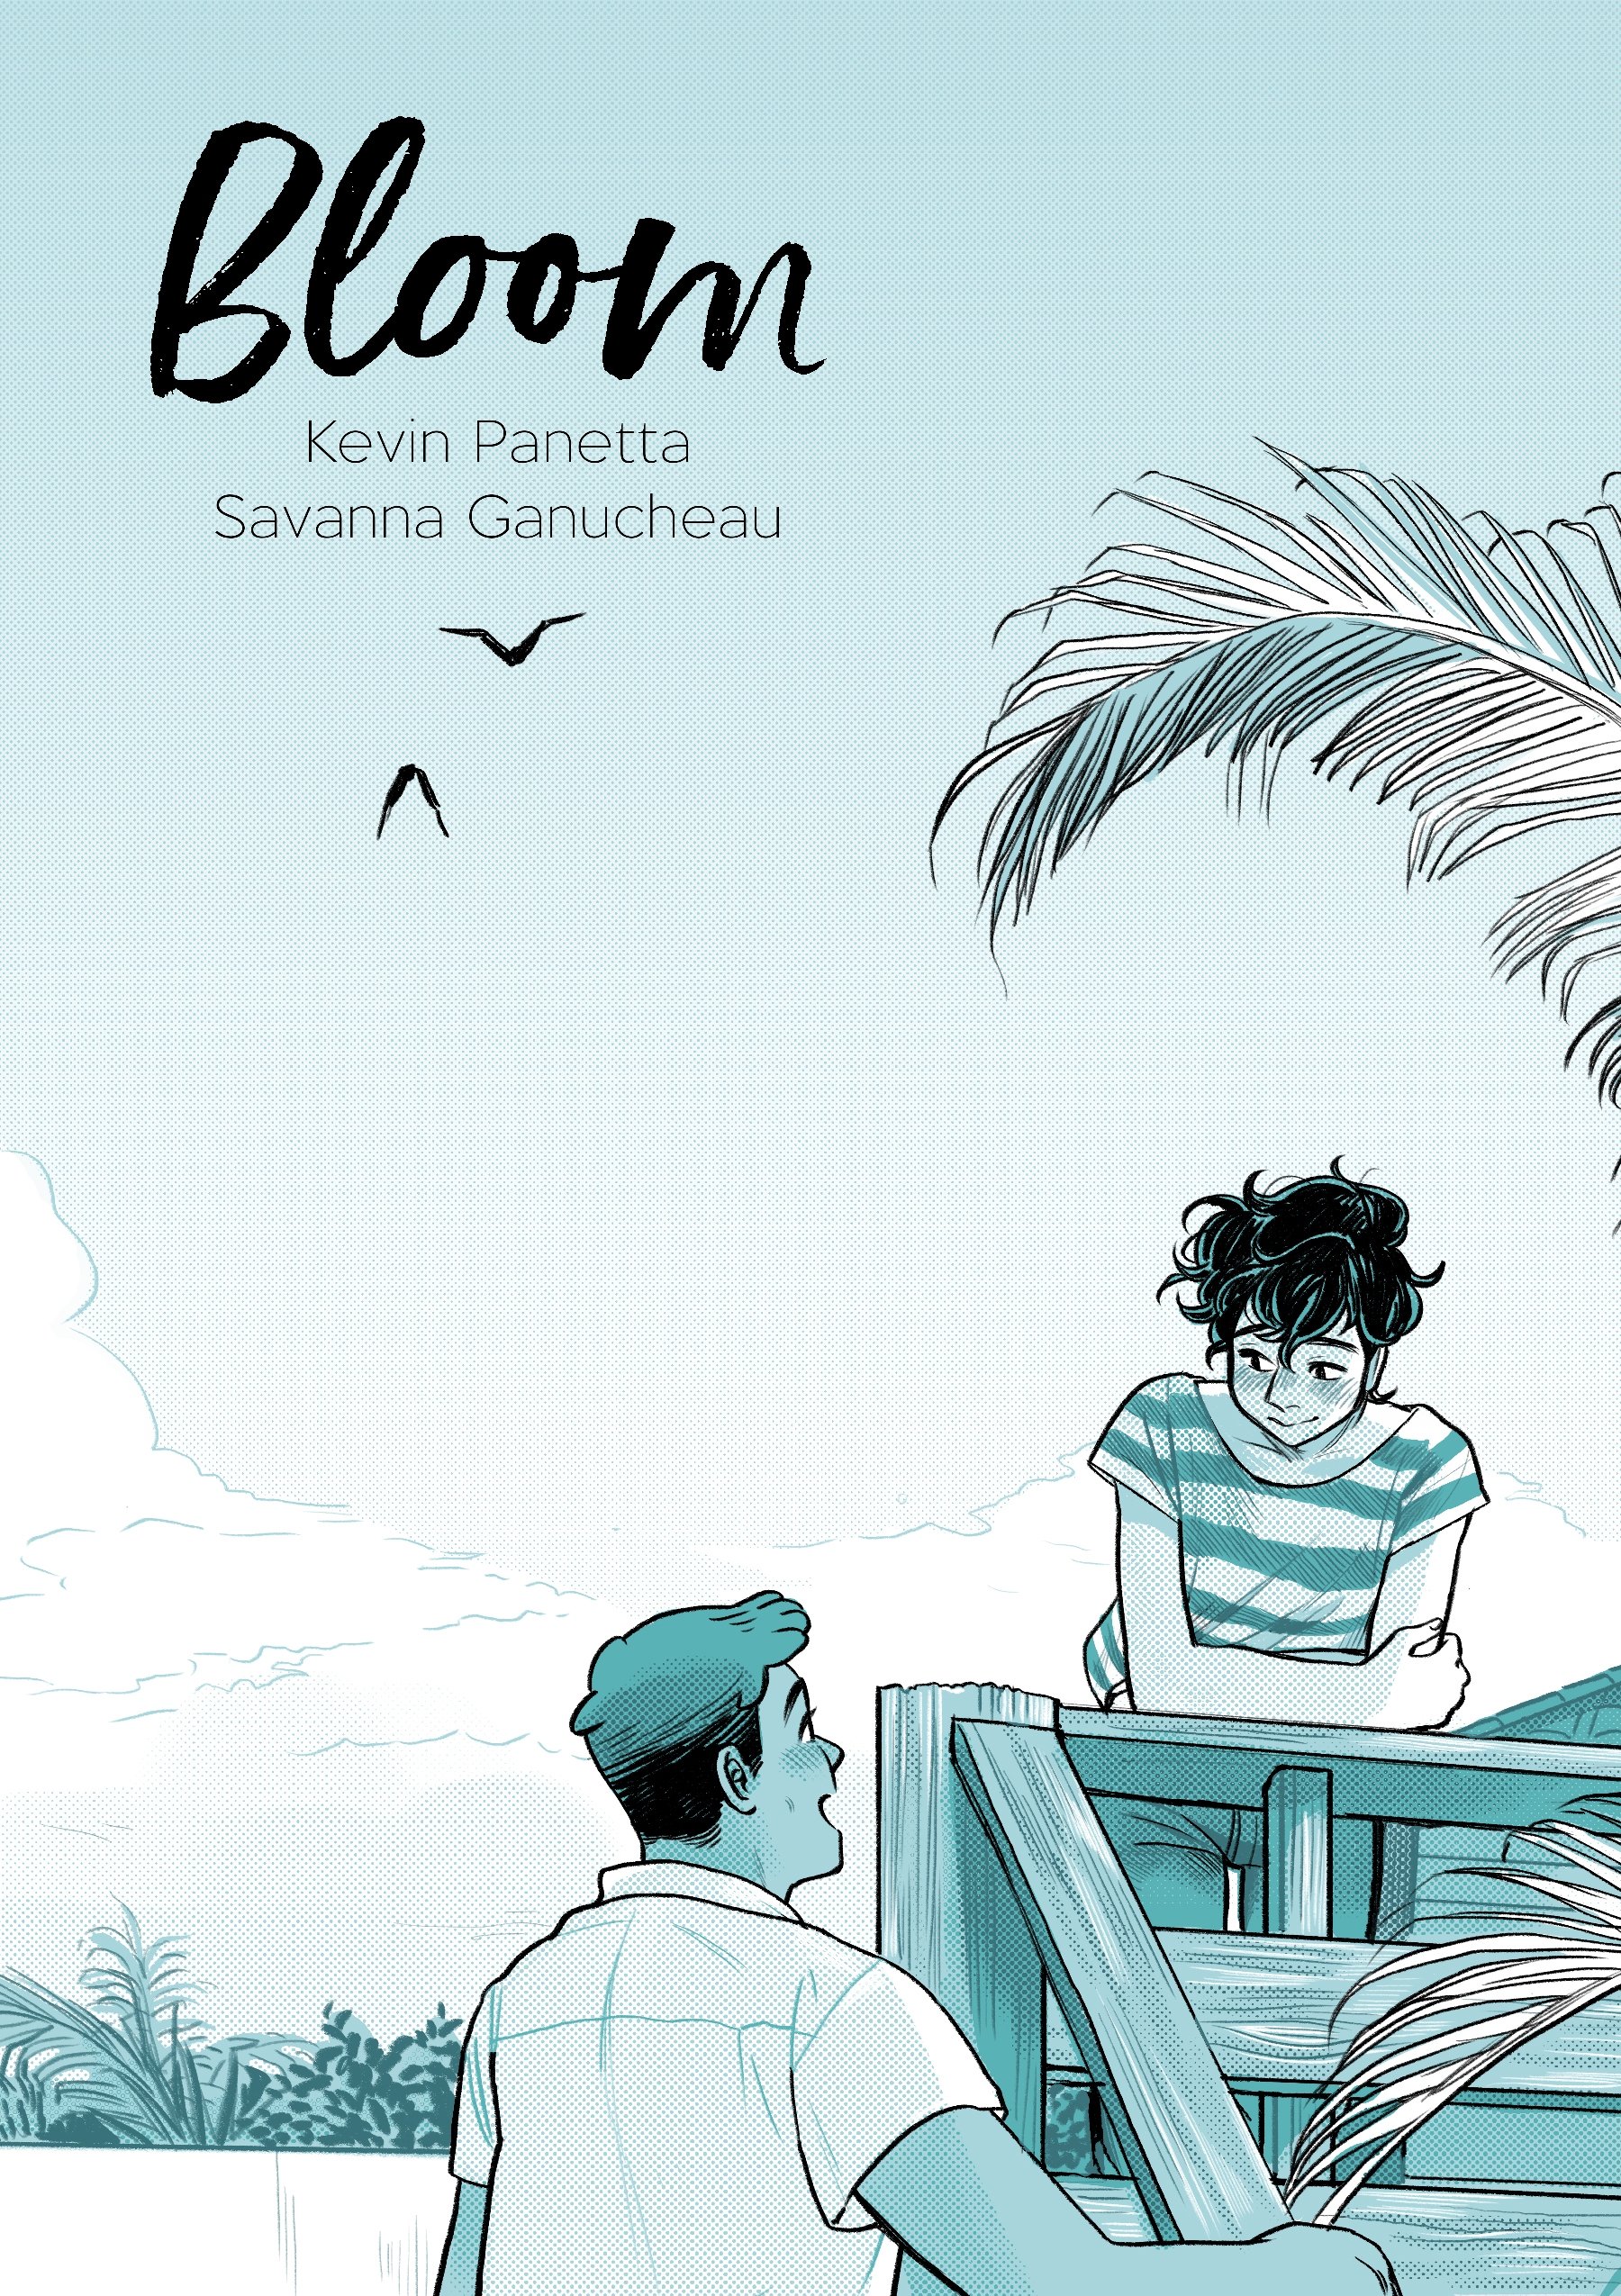 'Bloom' from First Second Books, written by Kevin Panetta and illustrated by Savanna Ganucheau